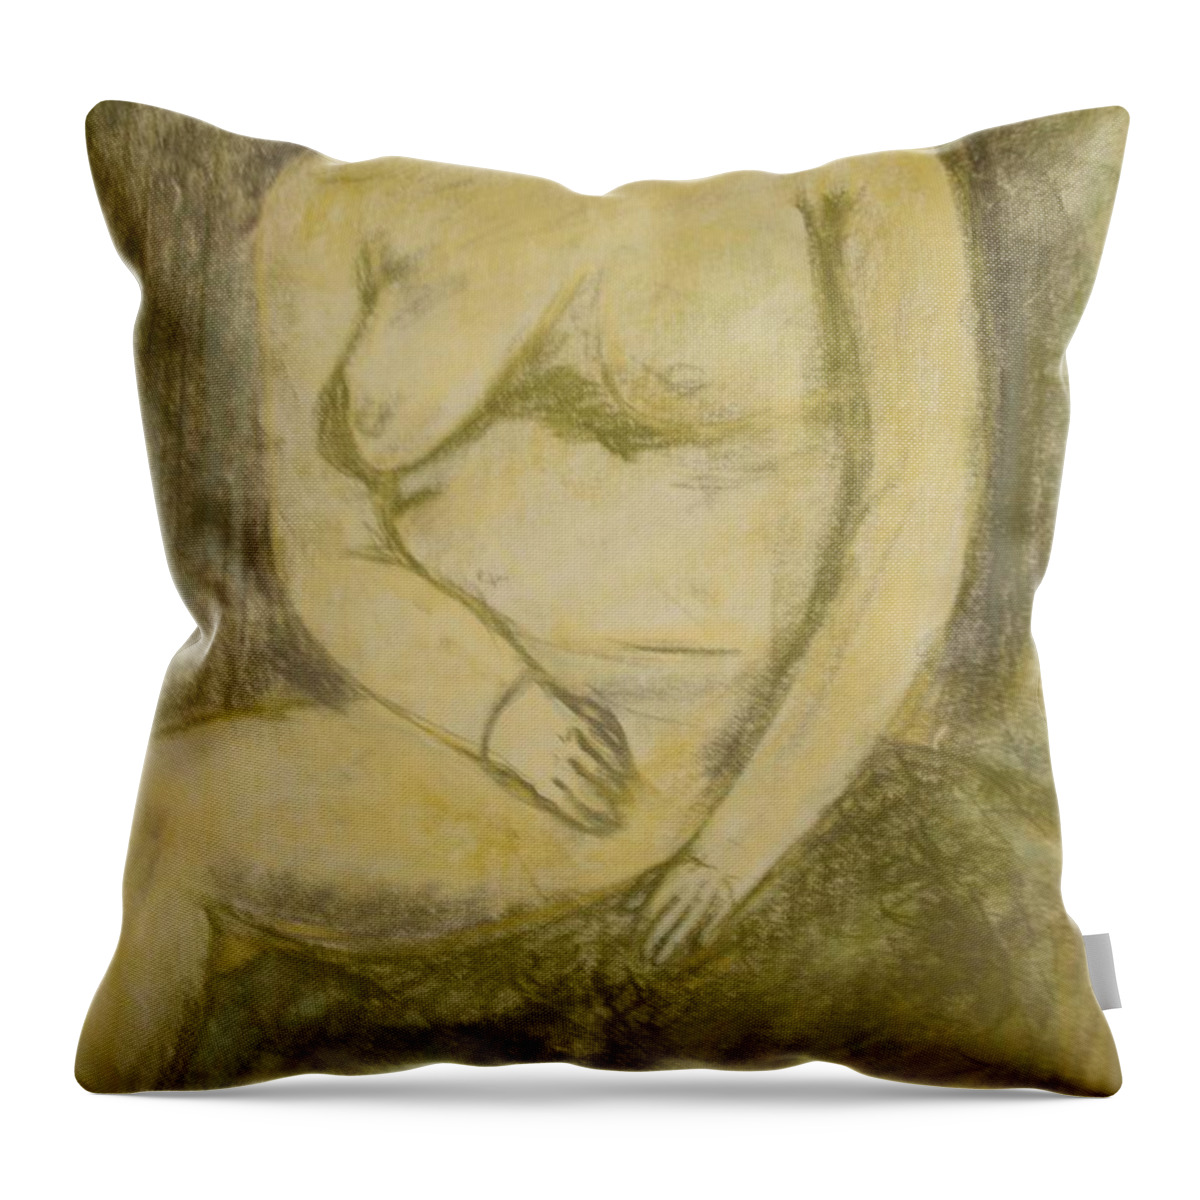 Female Throw Pillow featuring the pastel Degas by Samantha Lusby